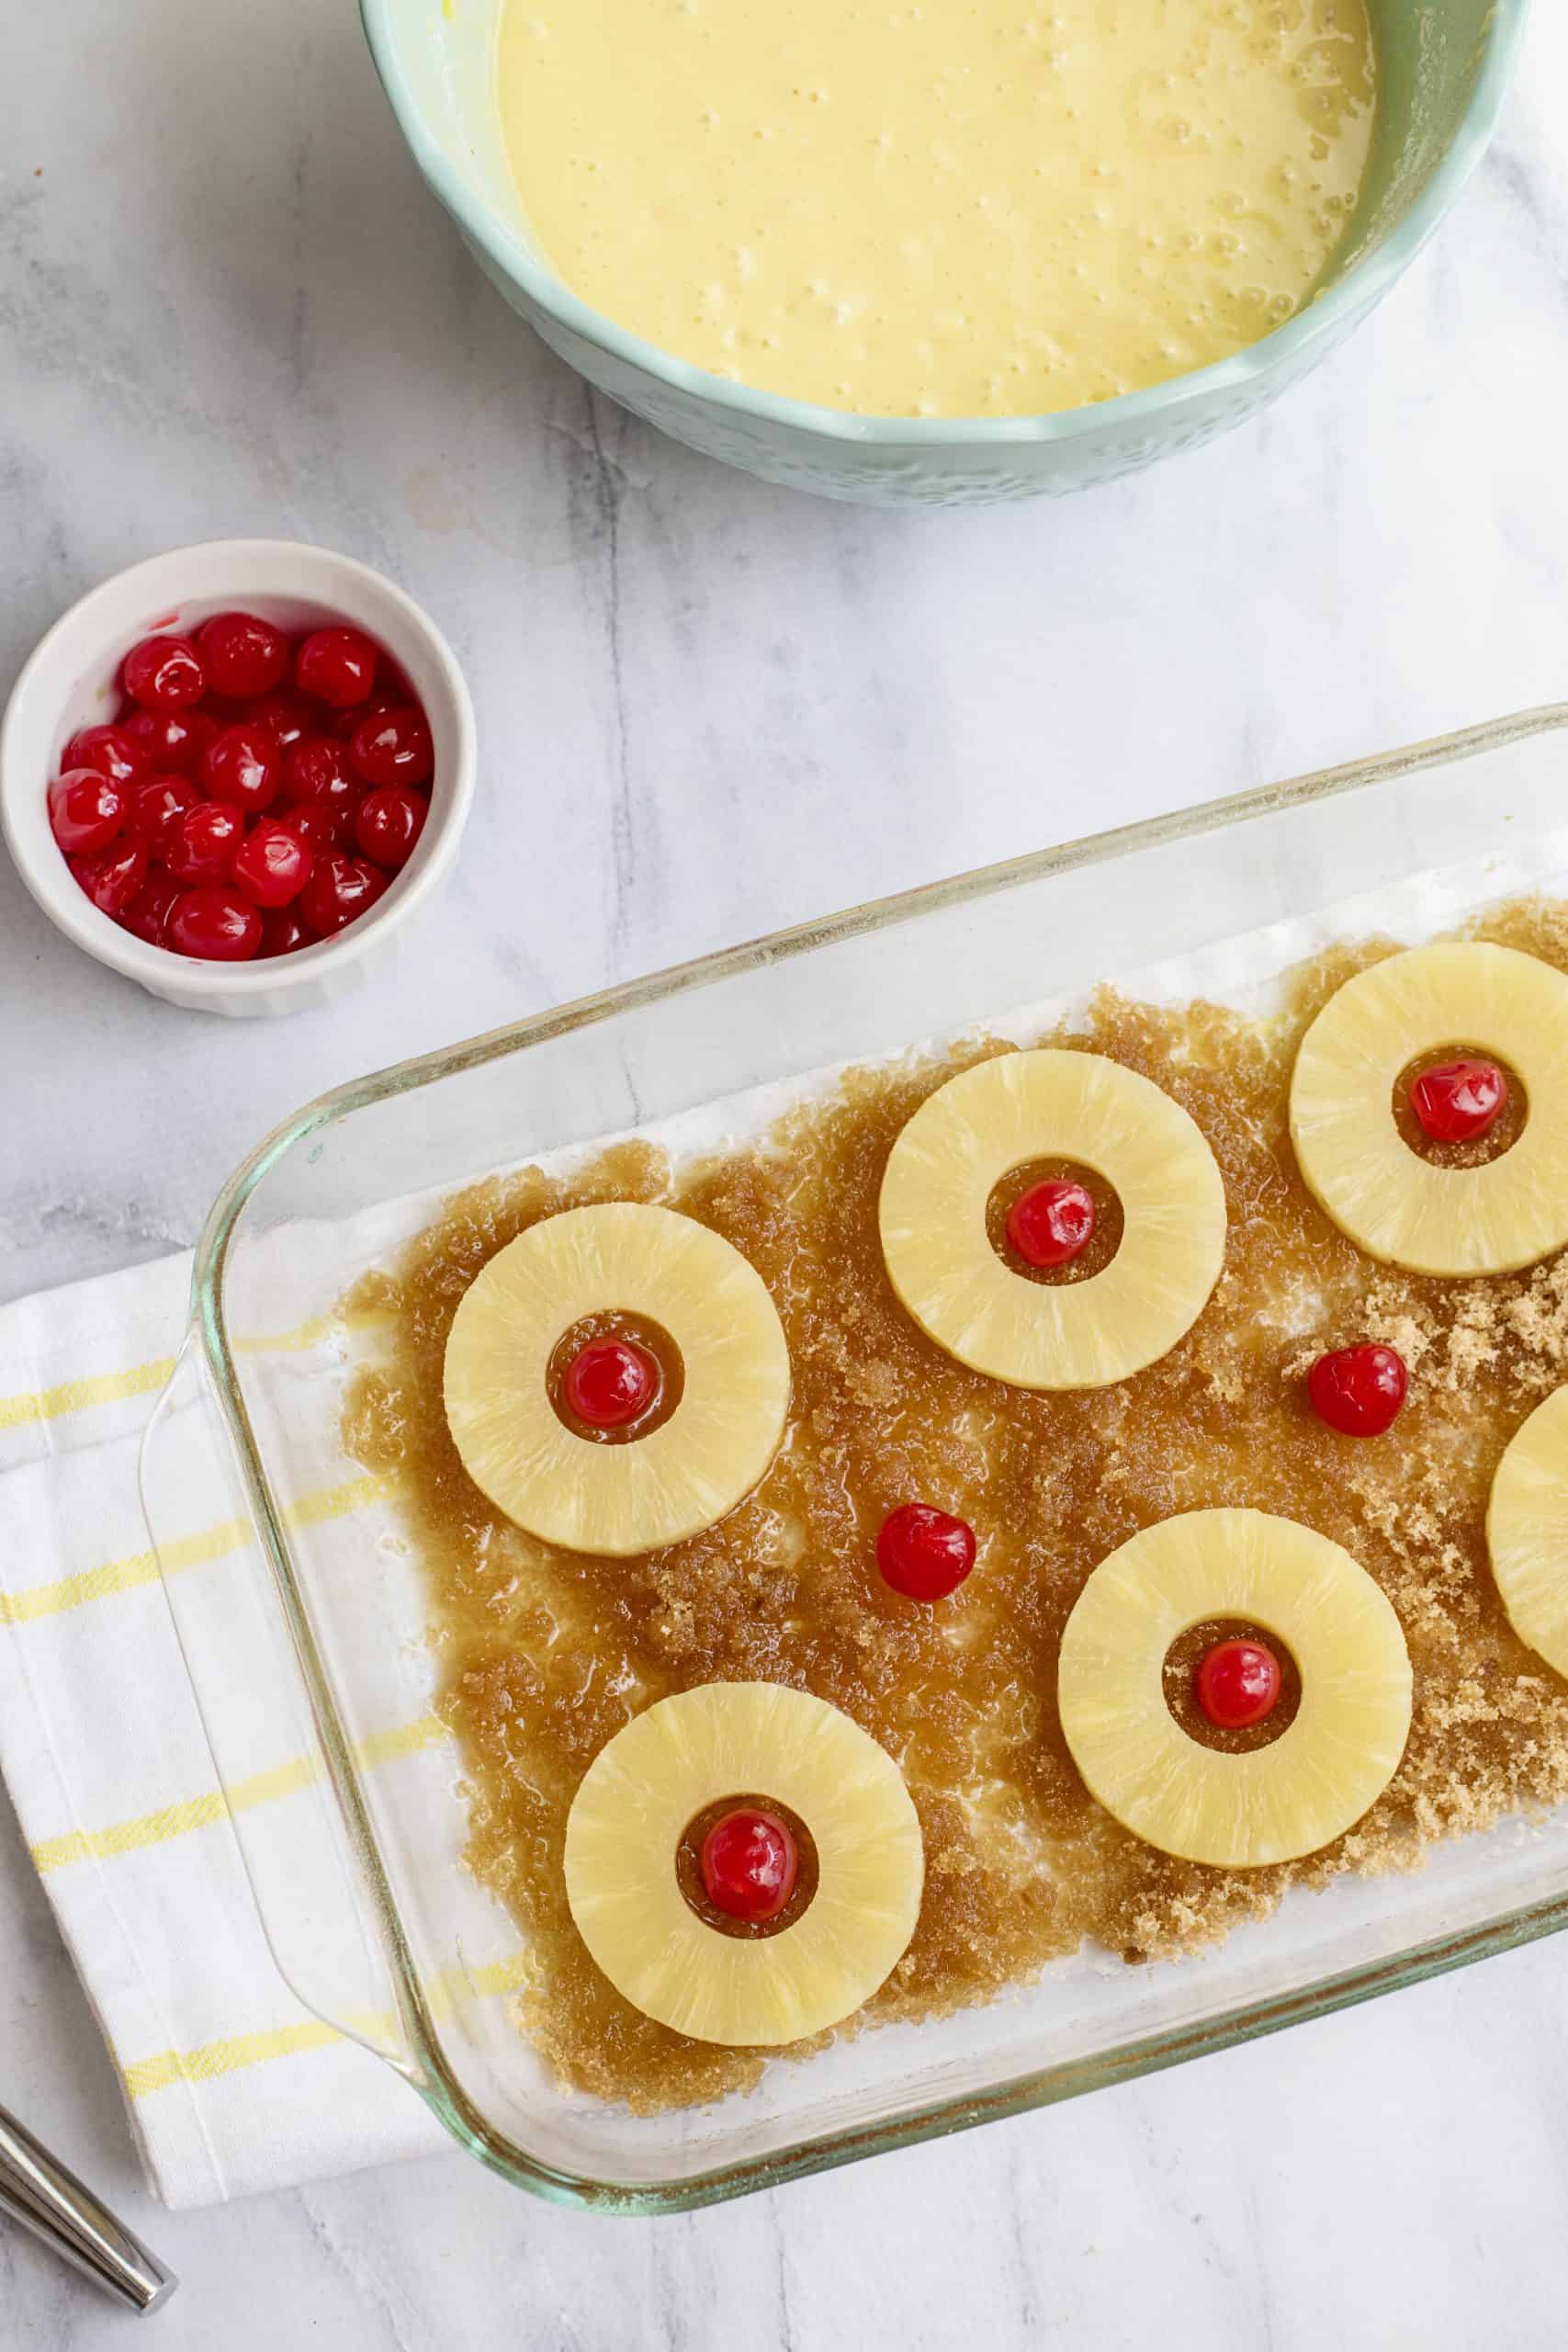 Add pineapple slices to sugar and place cherry in each center.